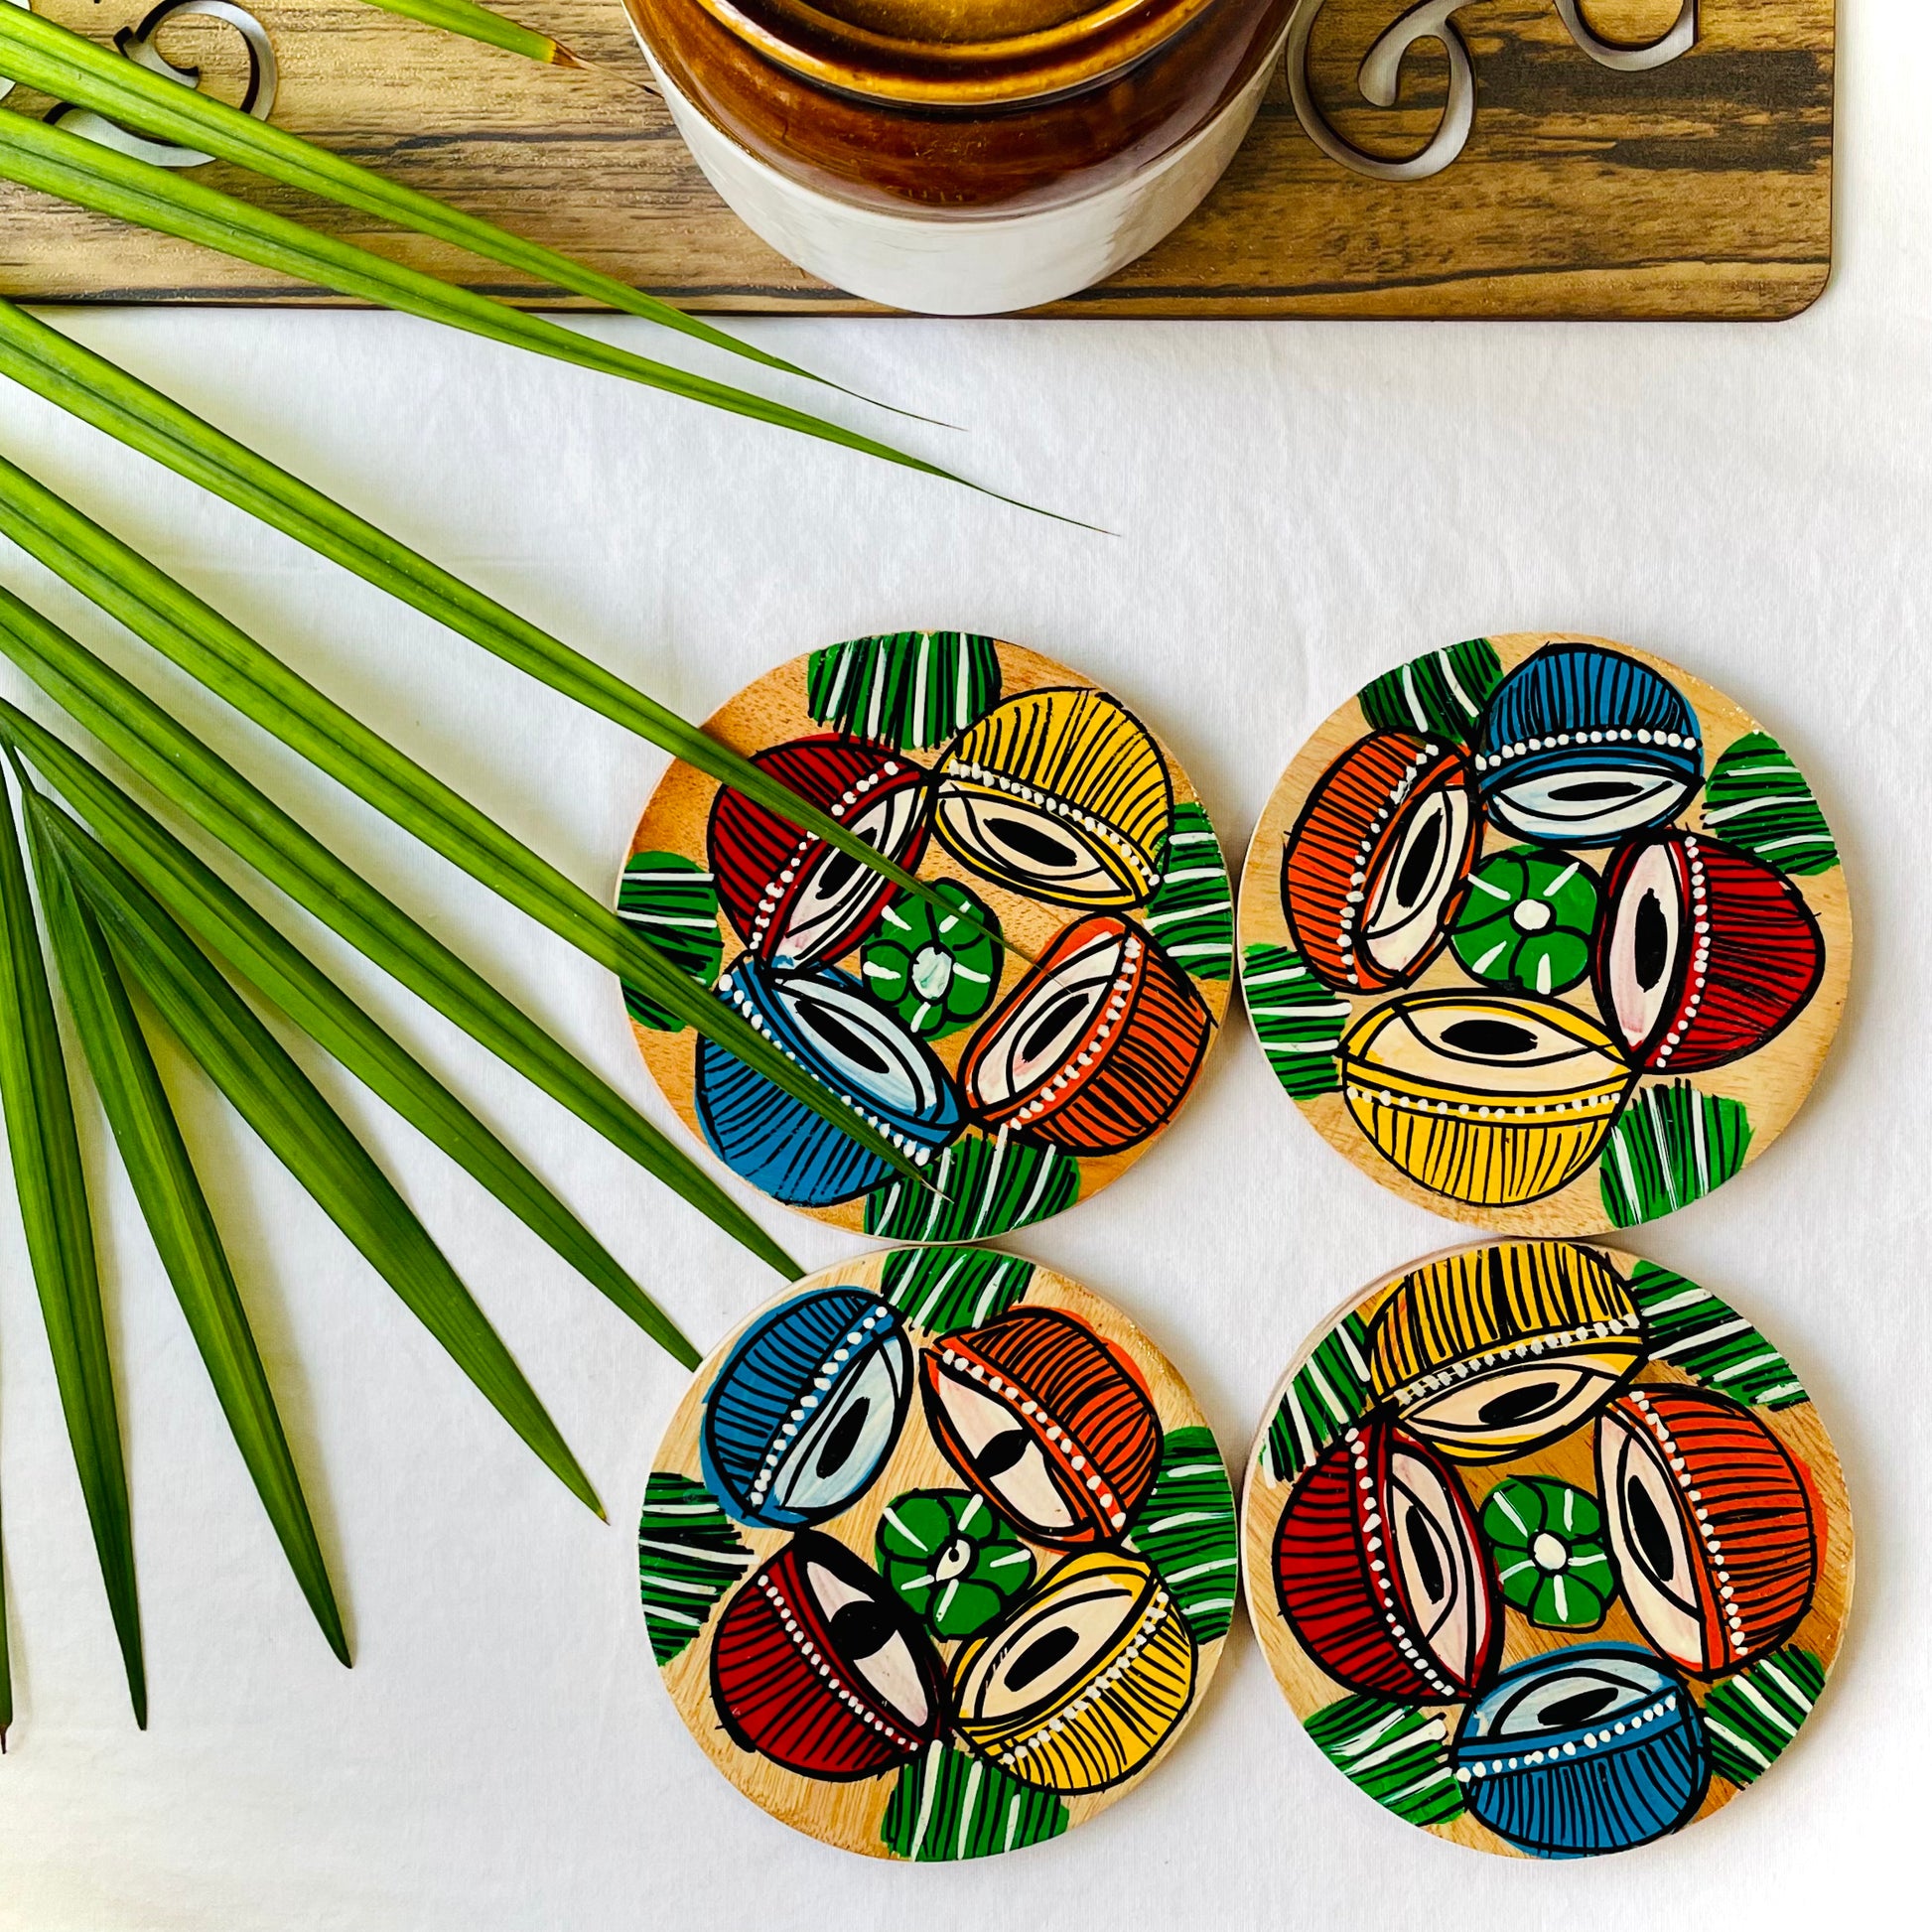 Four pure mango wood round wooden coasters, with a painting of four tabla, a type of Indian classical musical instrument in each wood coaster